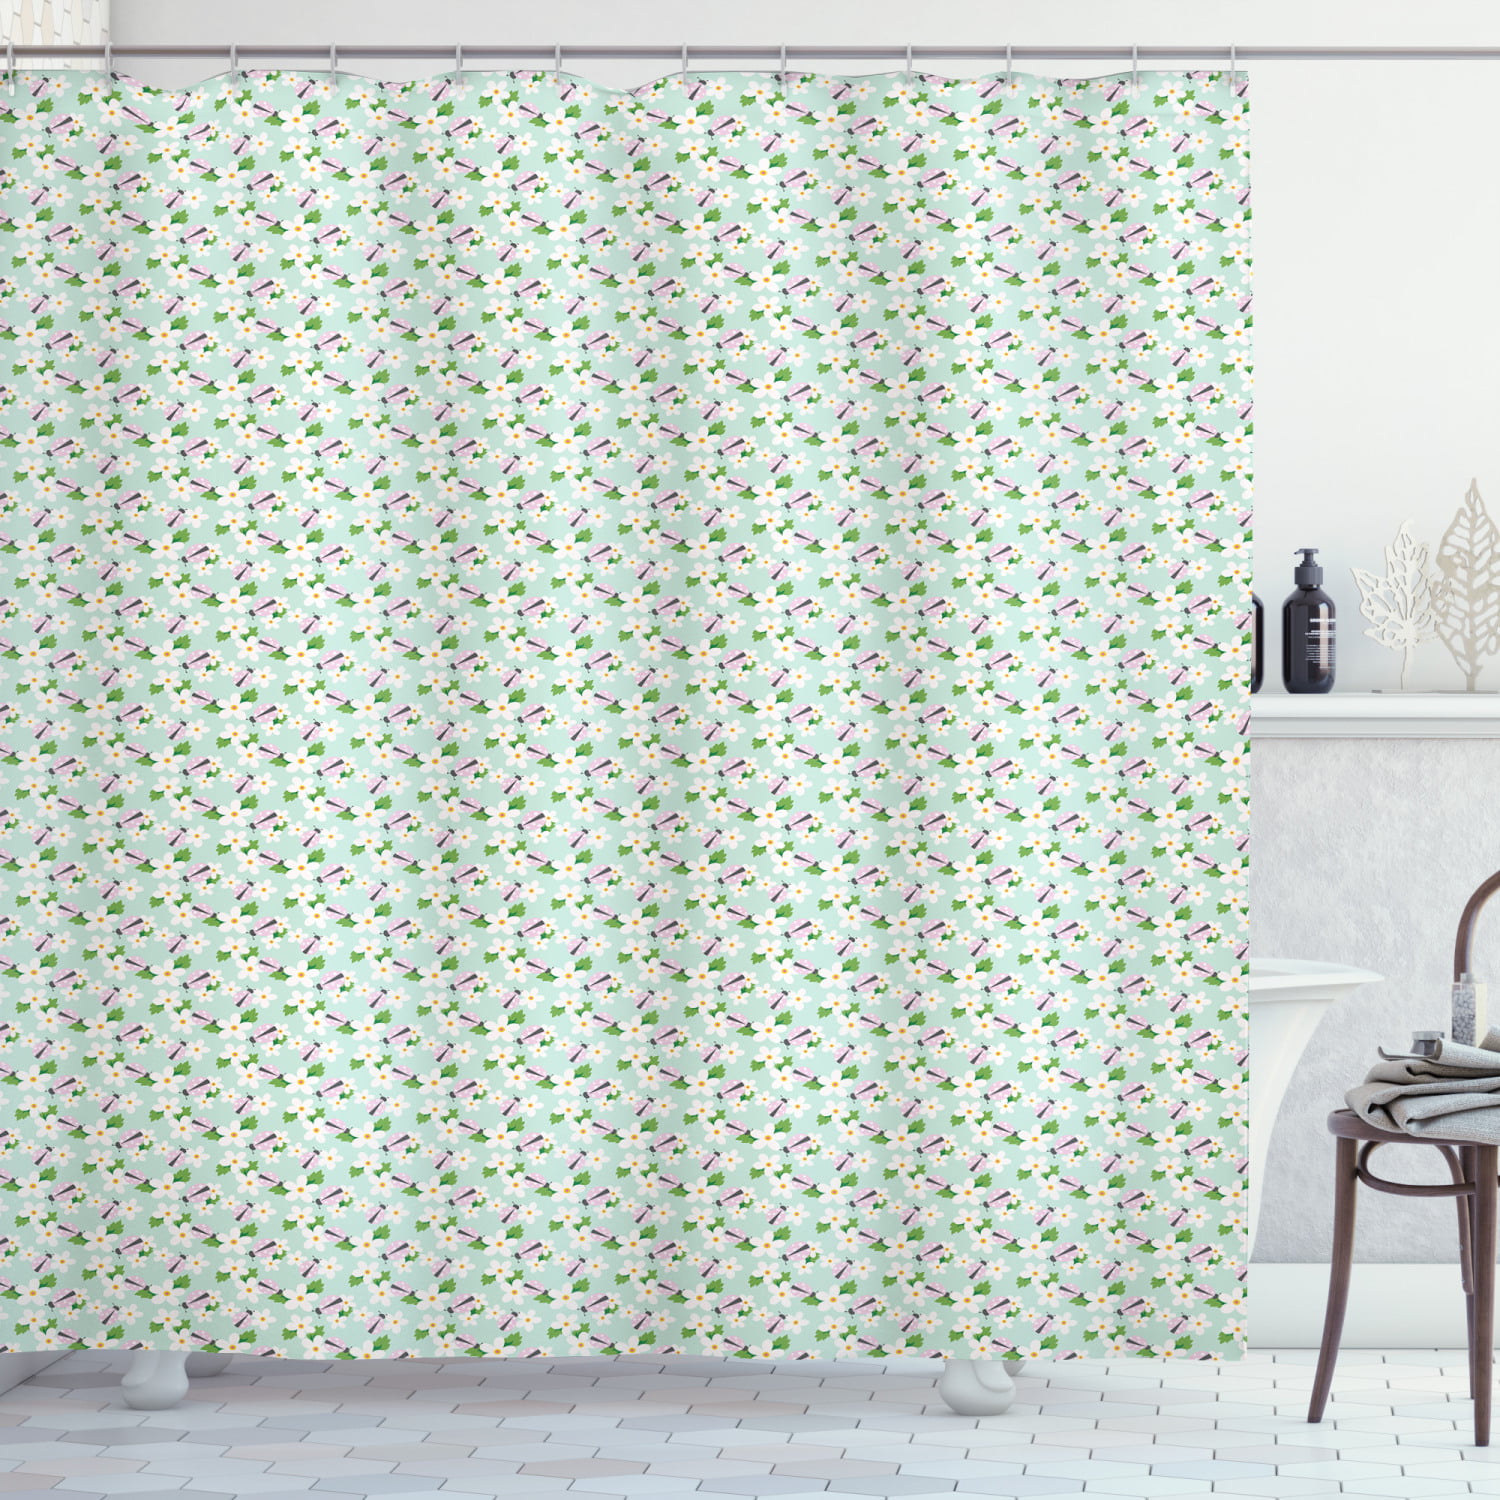 Details about   New Cartoon Pattern Custom Print Polyester Fabric Shower Curtain Waterproof 